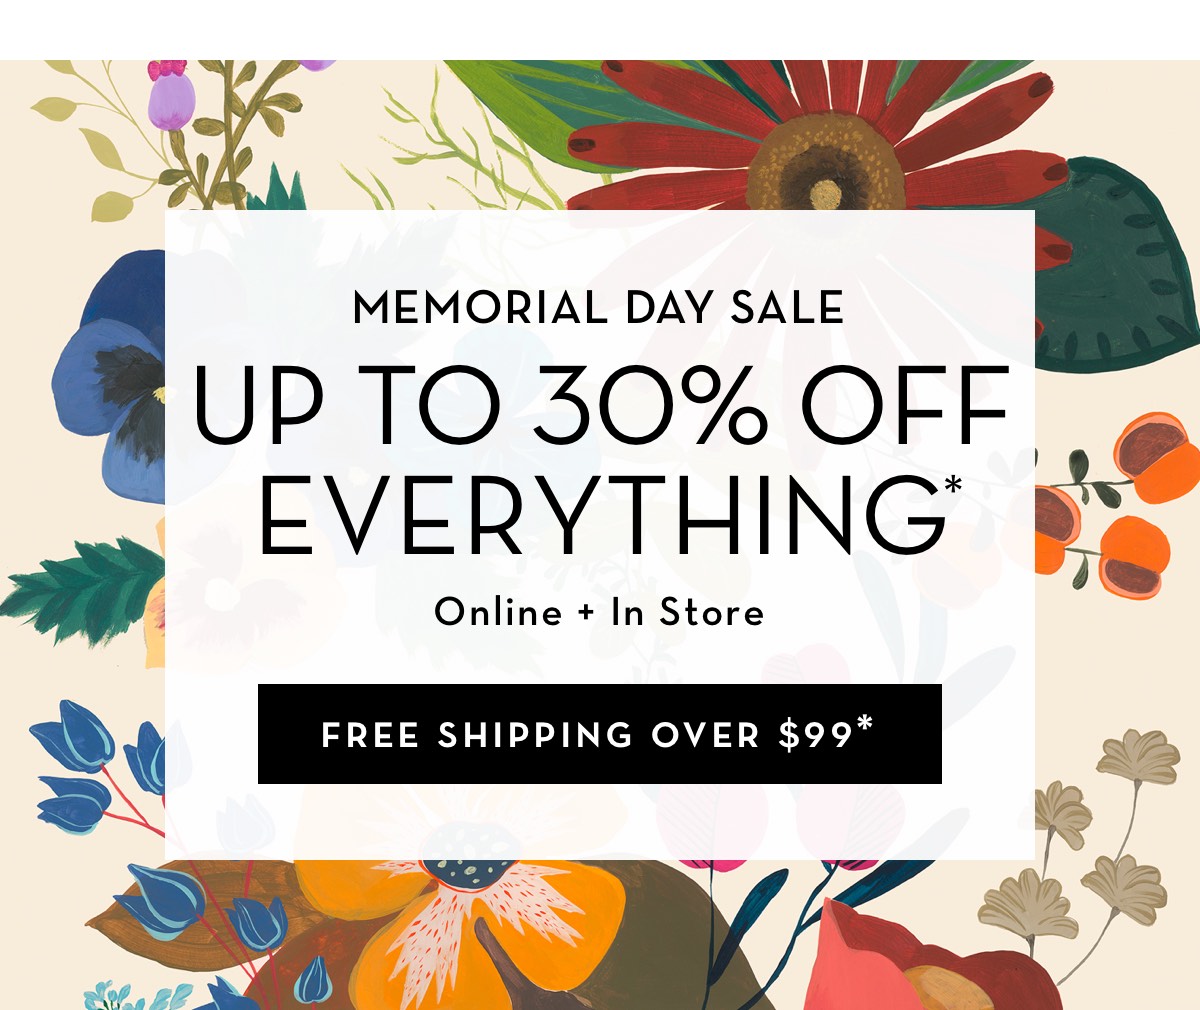  EVERYTHING Online In Store 4UD TO 30% OFF ' e S , ", 